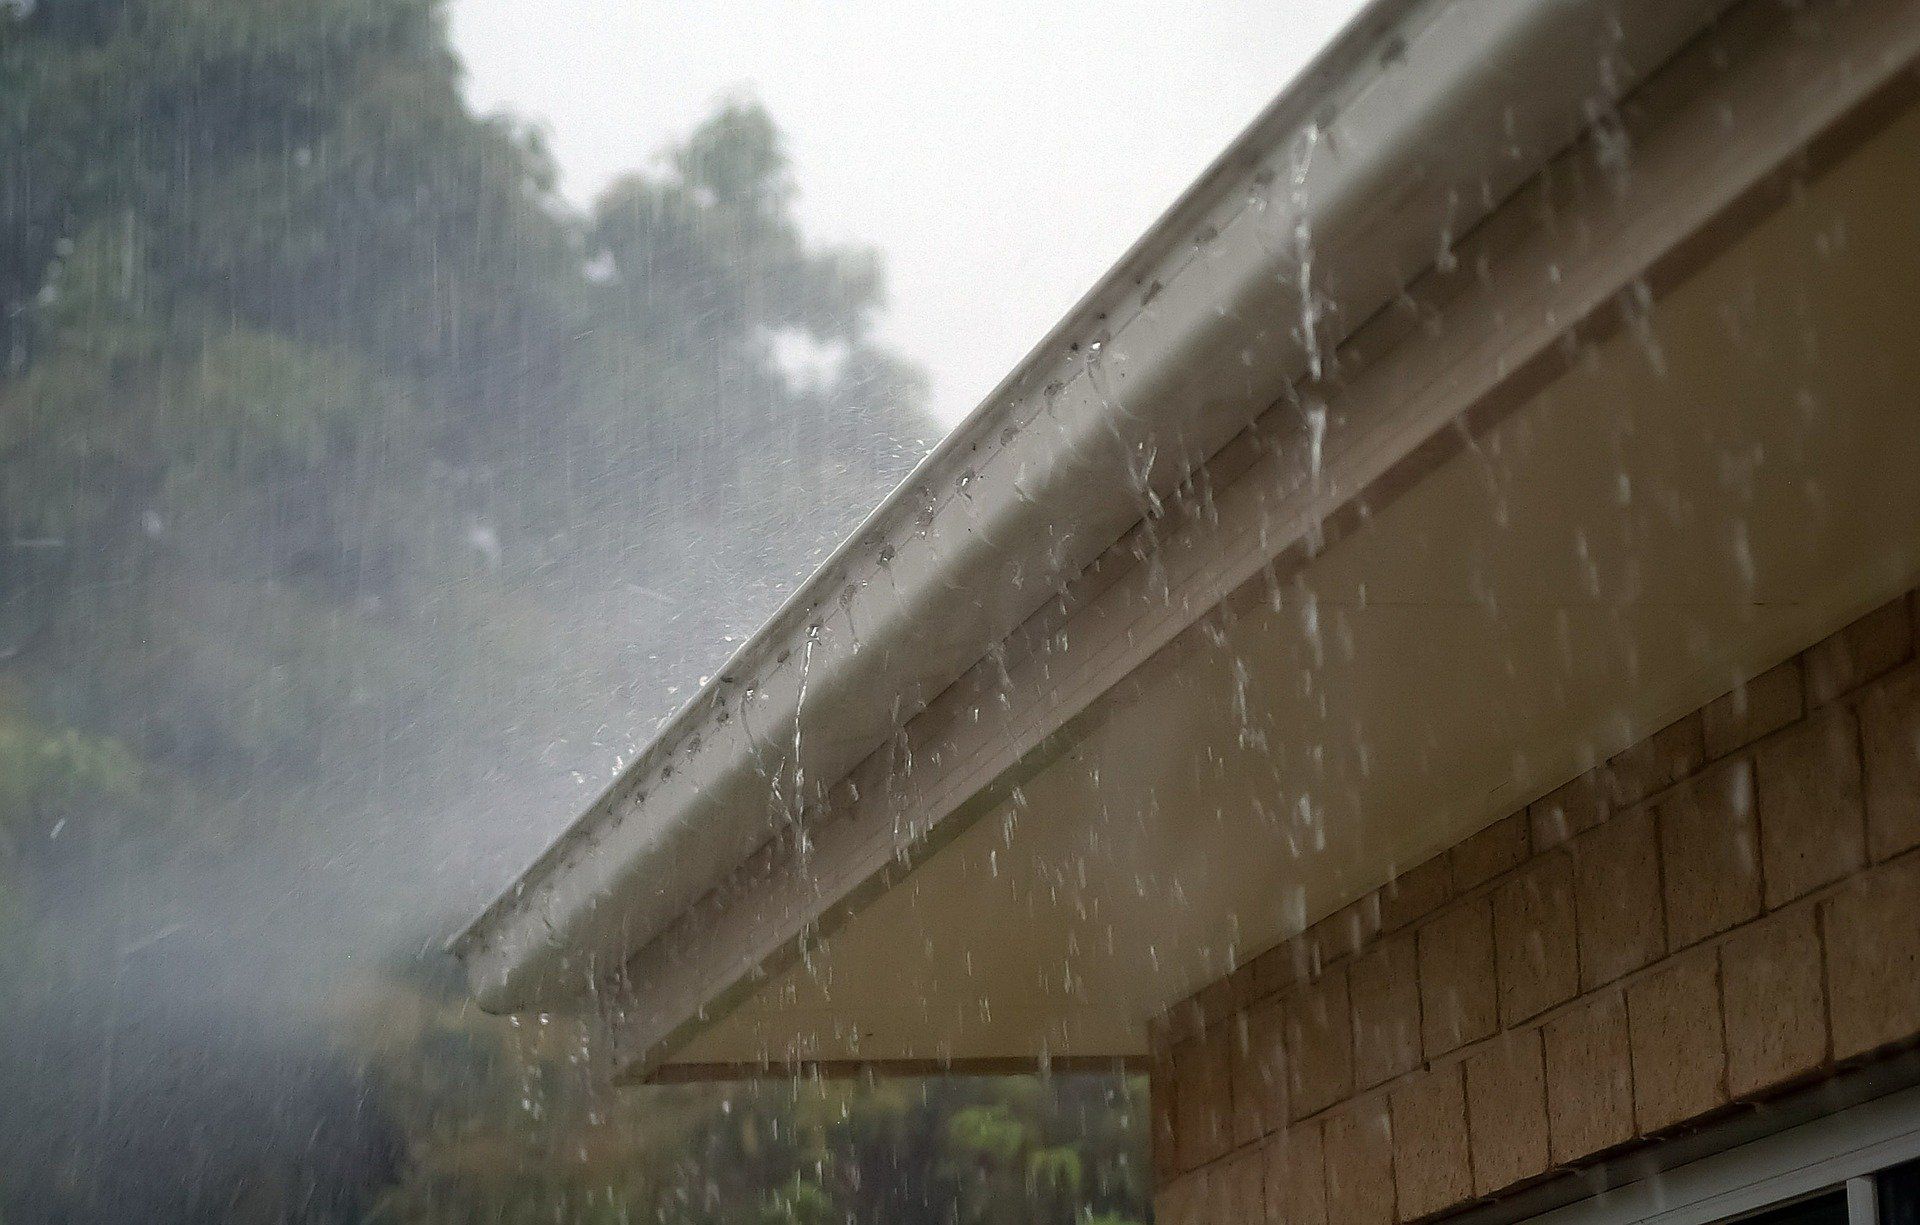 Gutter with water overflowing in Wollongong NSW